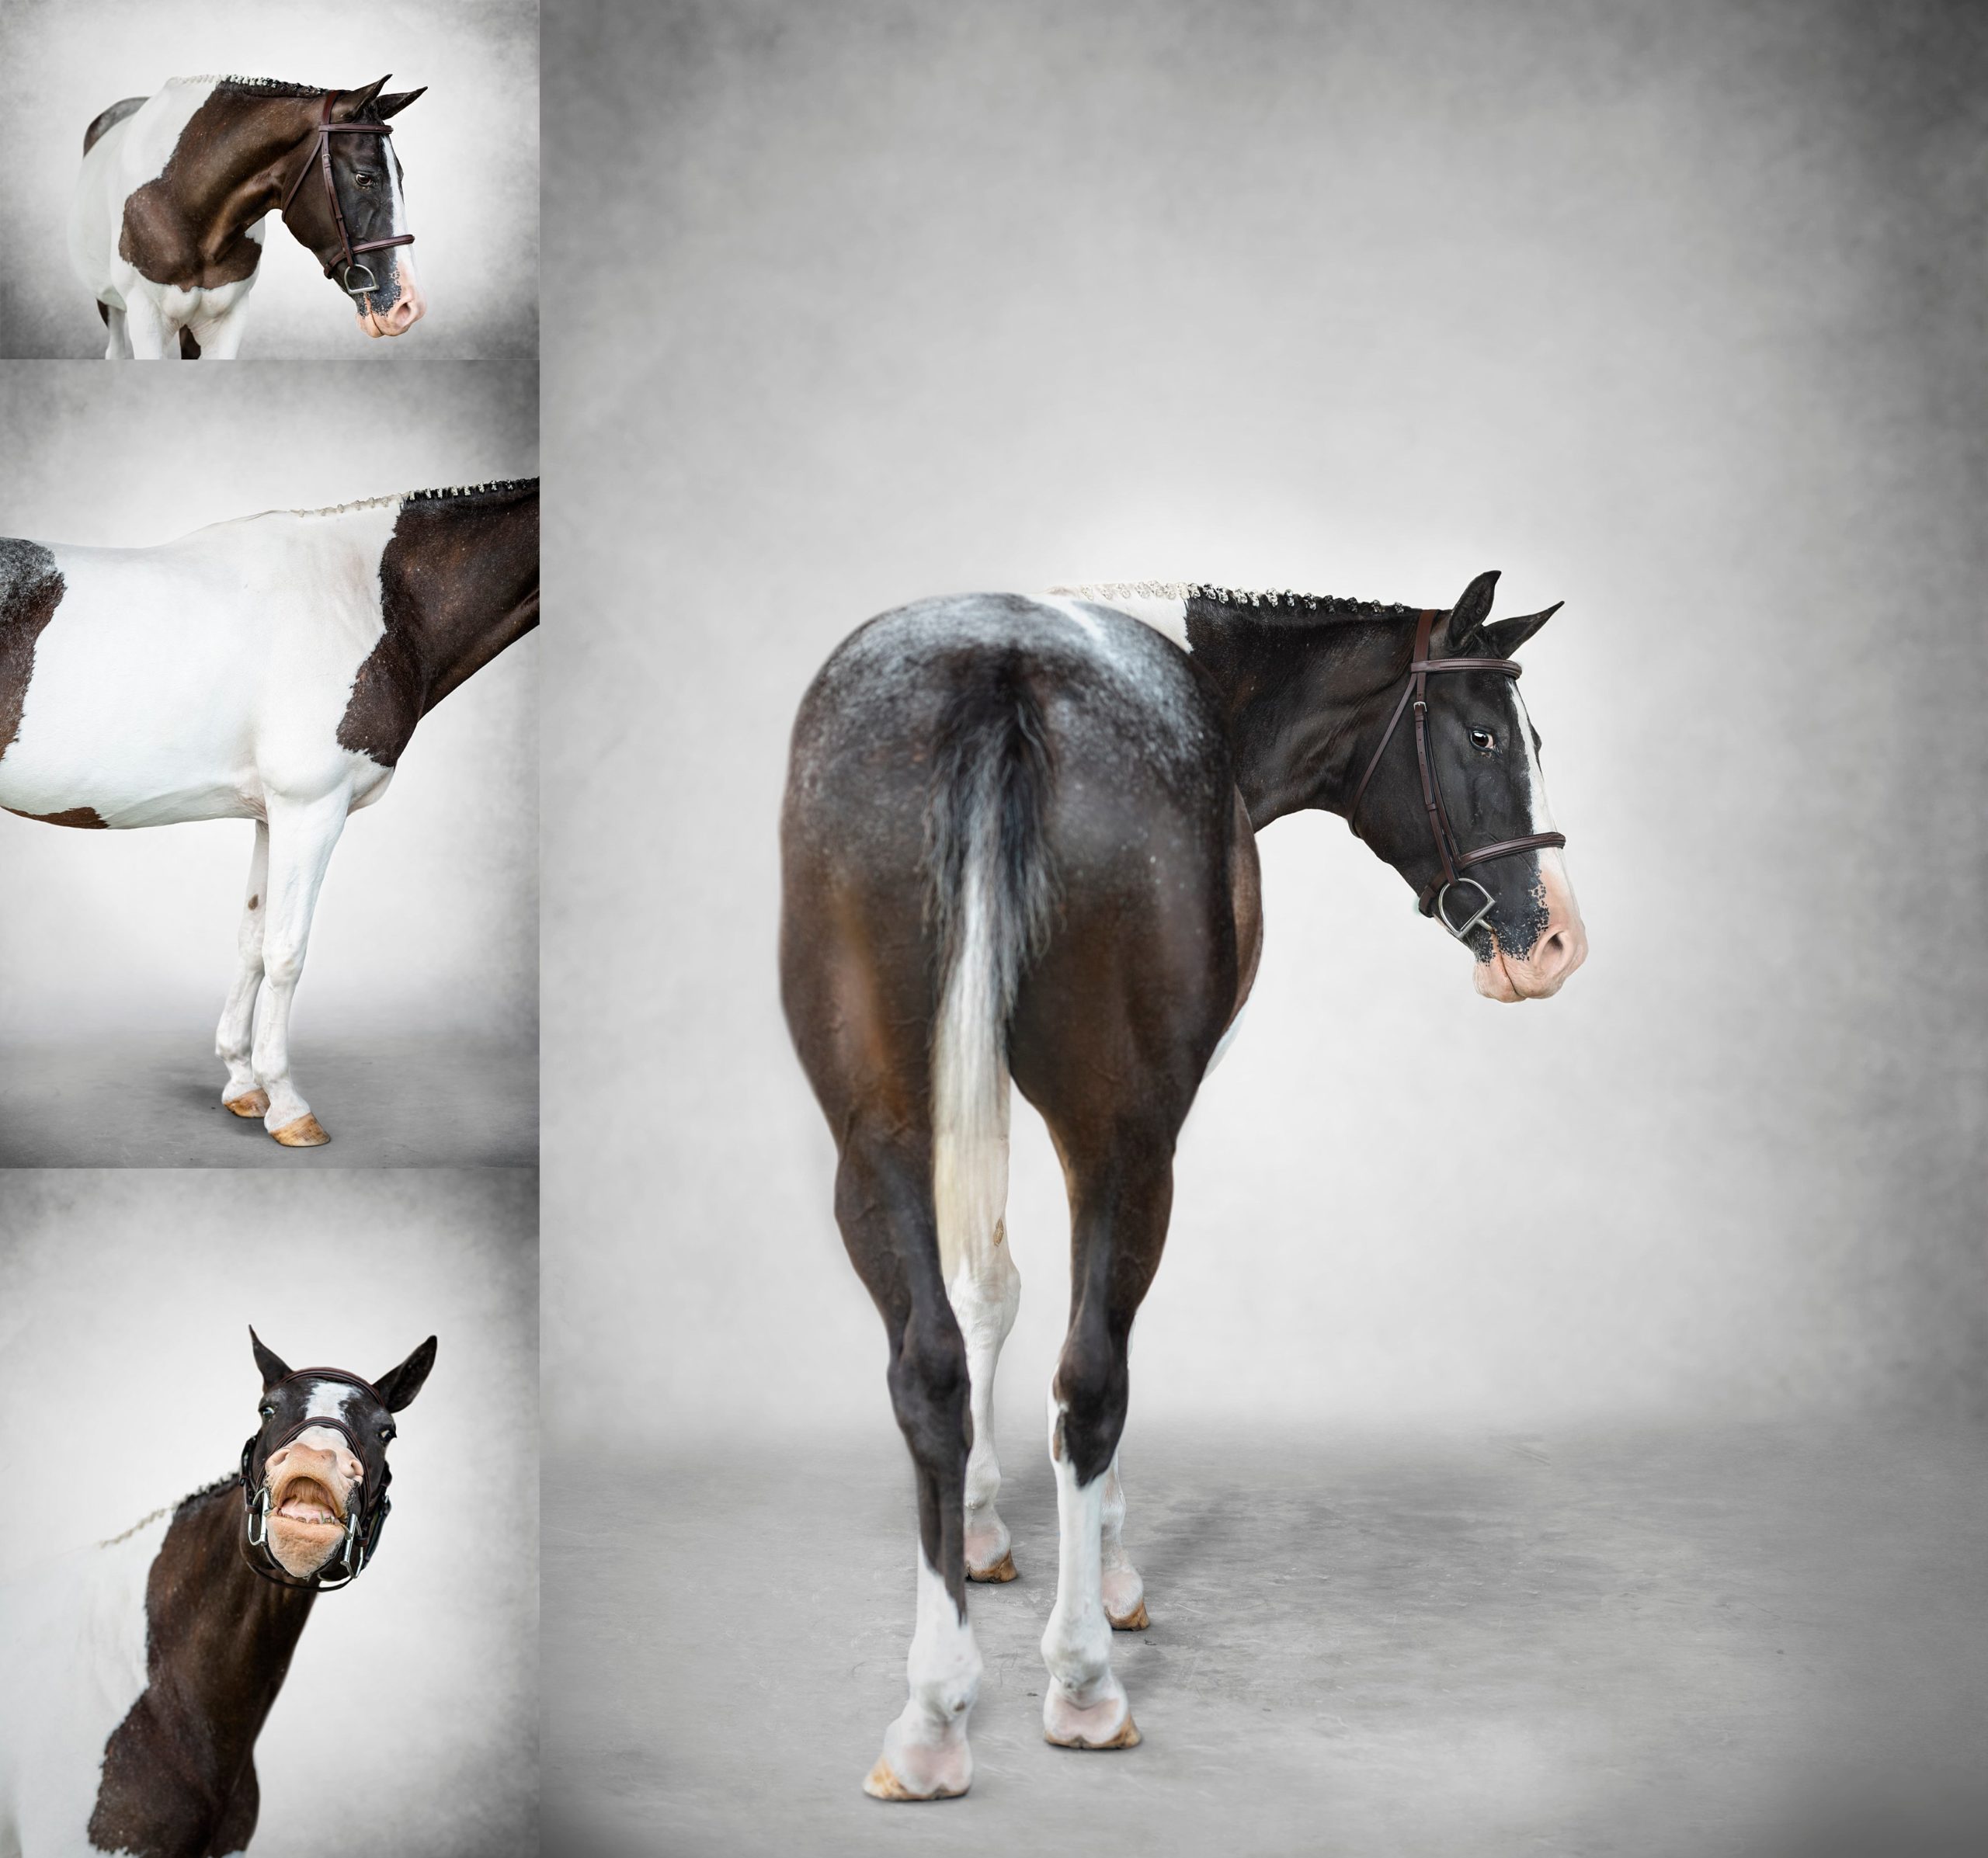 Every Spot Matters photography project focusing on spotted horse breeds.